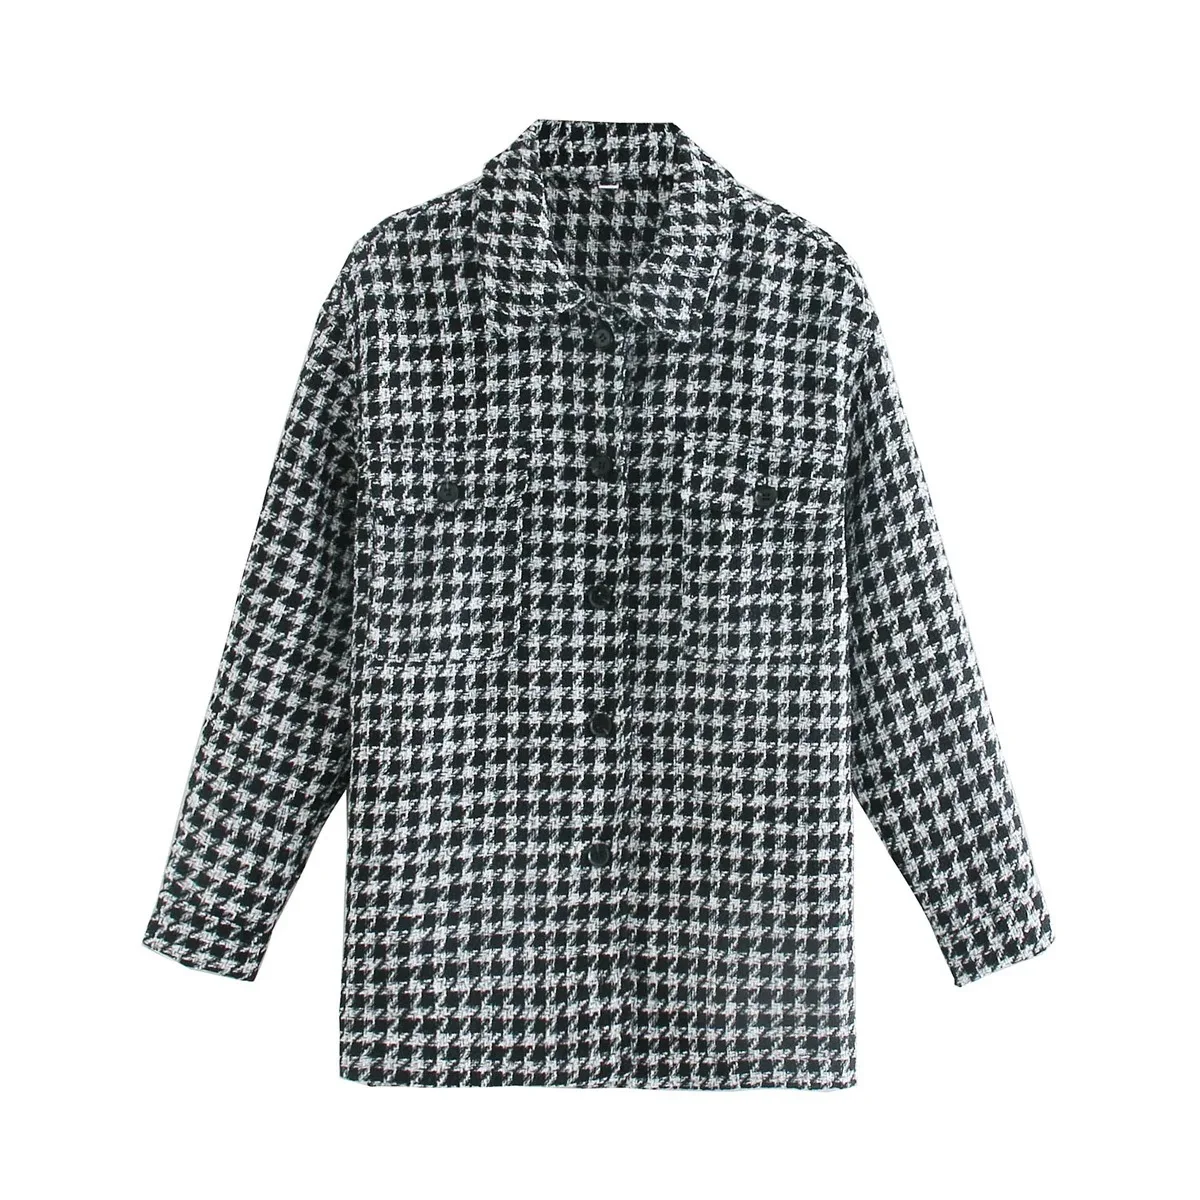 

Fashion Women Houndstooth Frayed Tweed Jacket Coat Vintage Pockets Long Sleeve Jackets for Women New Female Outerwear Chic Tops